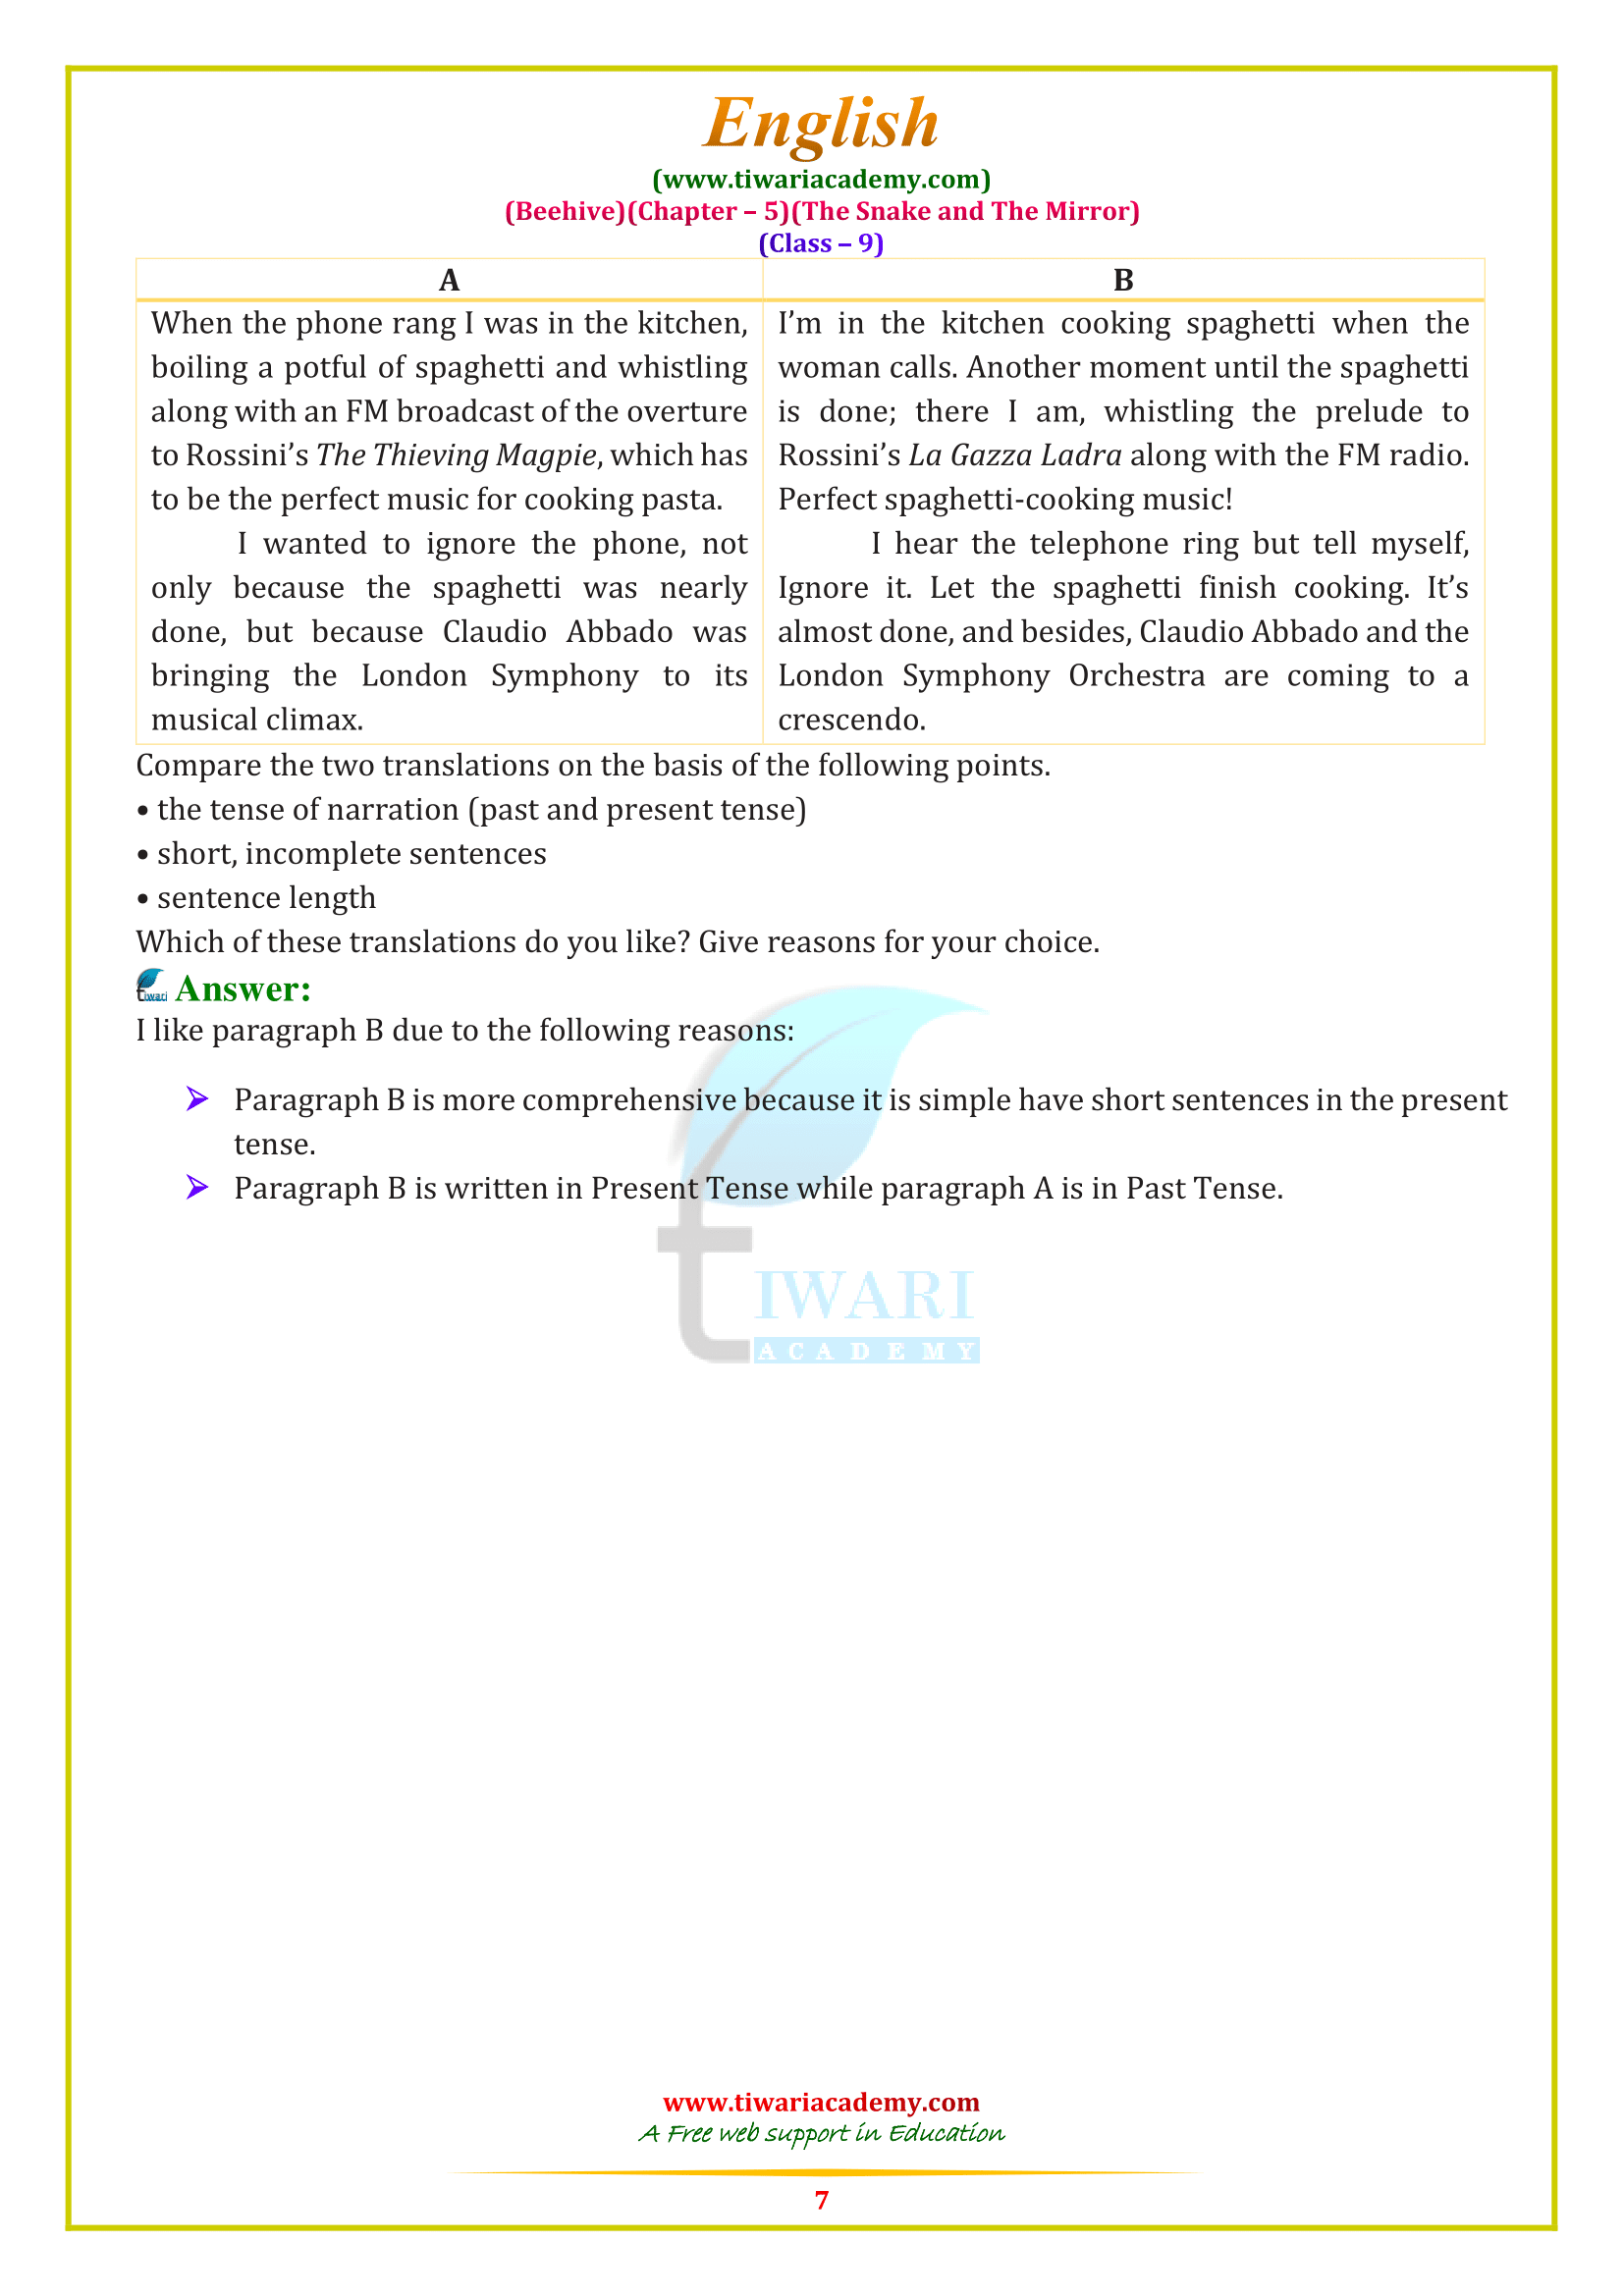 9 English chapter 5 in pdf